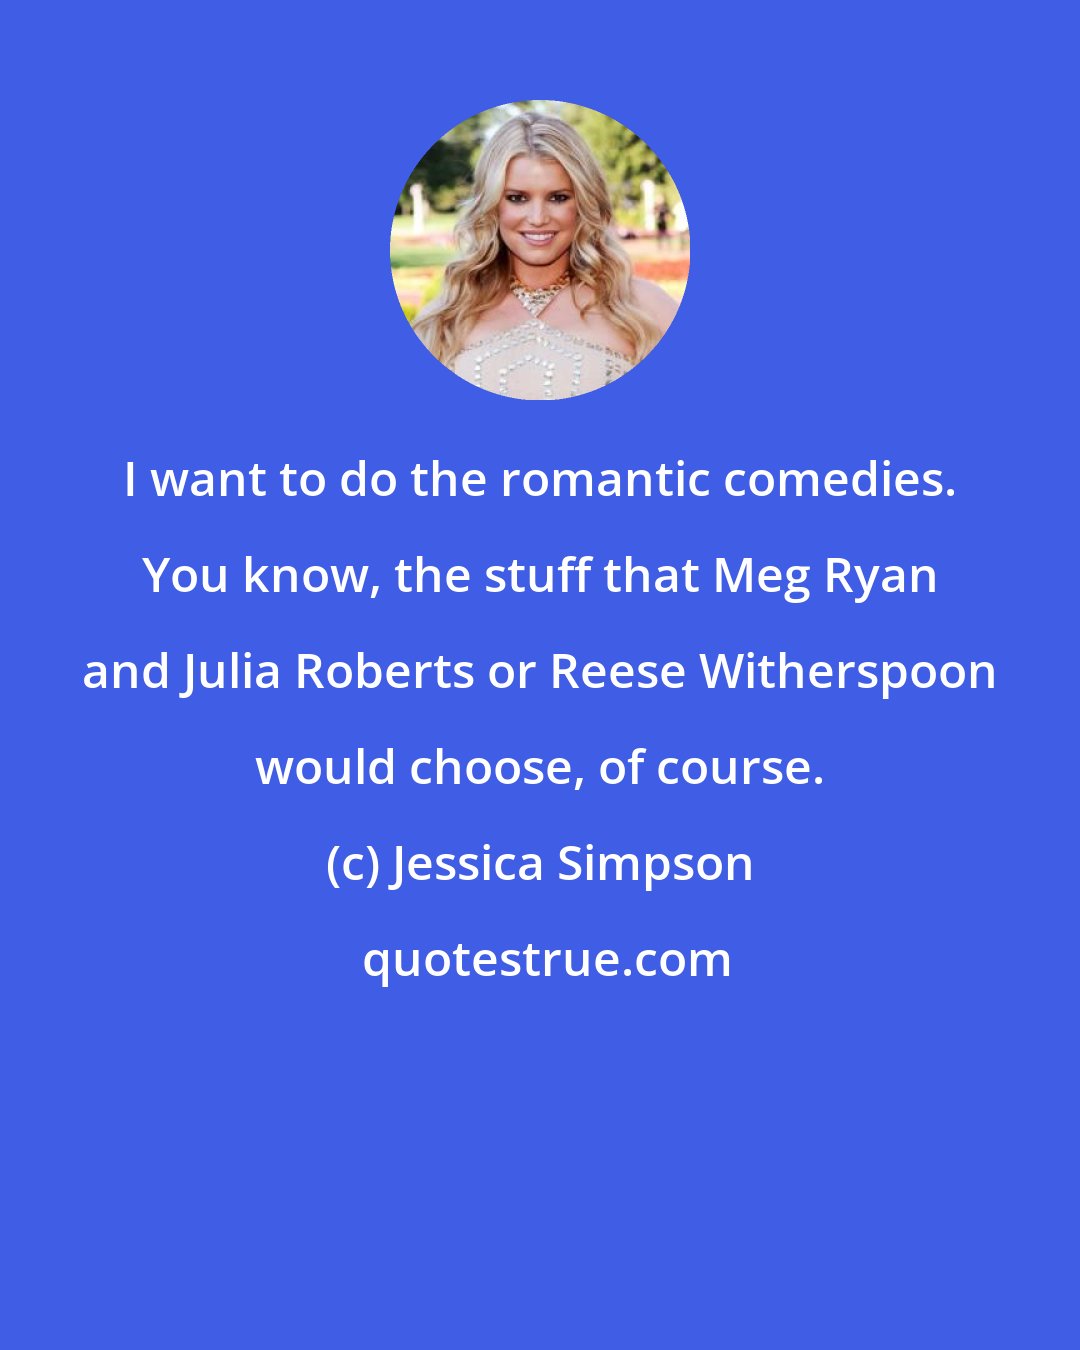 Jessica Simpson: I want to do the romantic comedies. You know, the stuff that Meg Ryan and Julia Roberts or Reese Witherspoon would choose, of course.